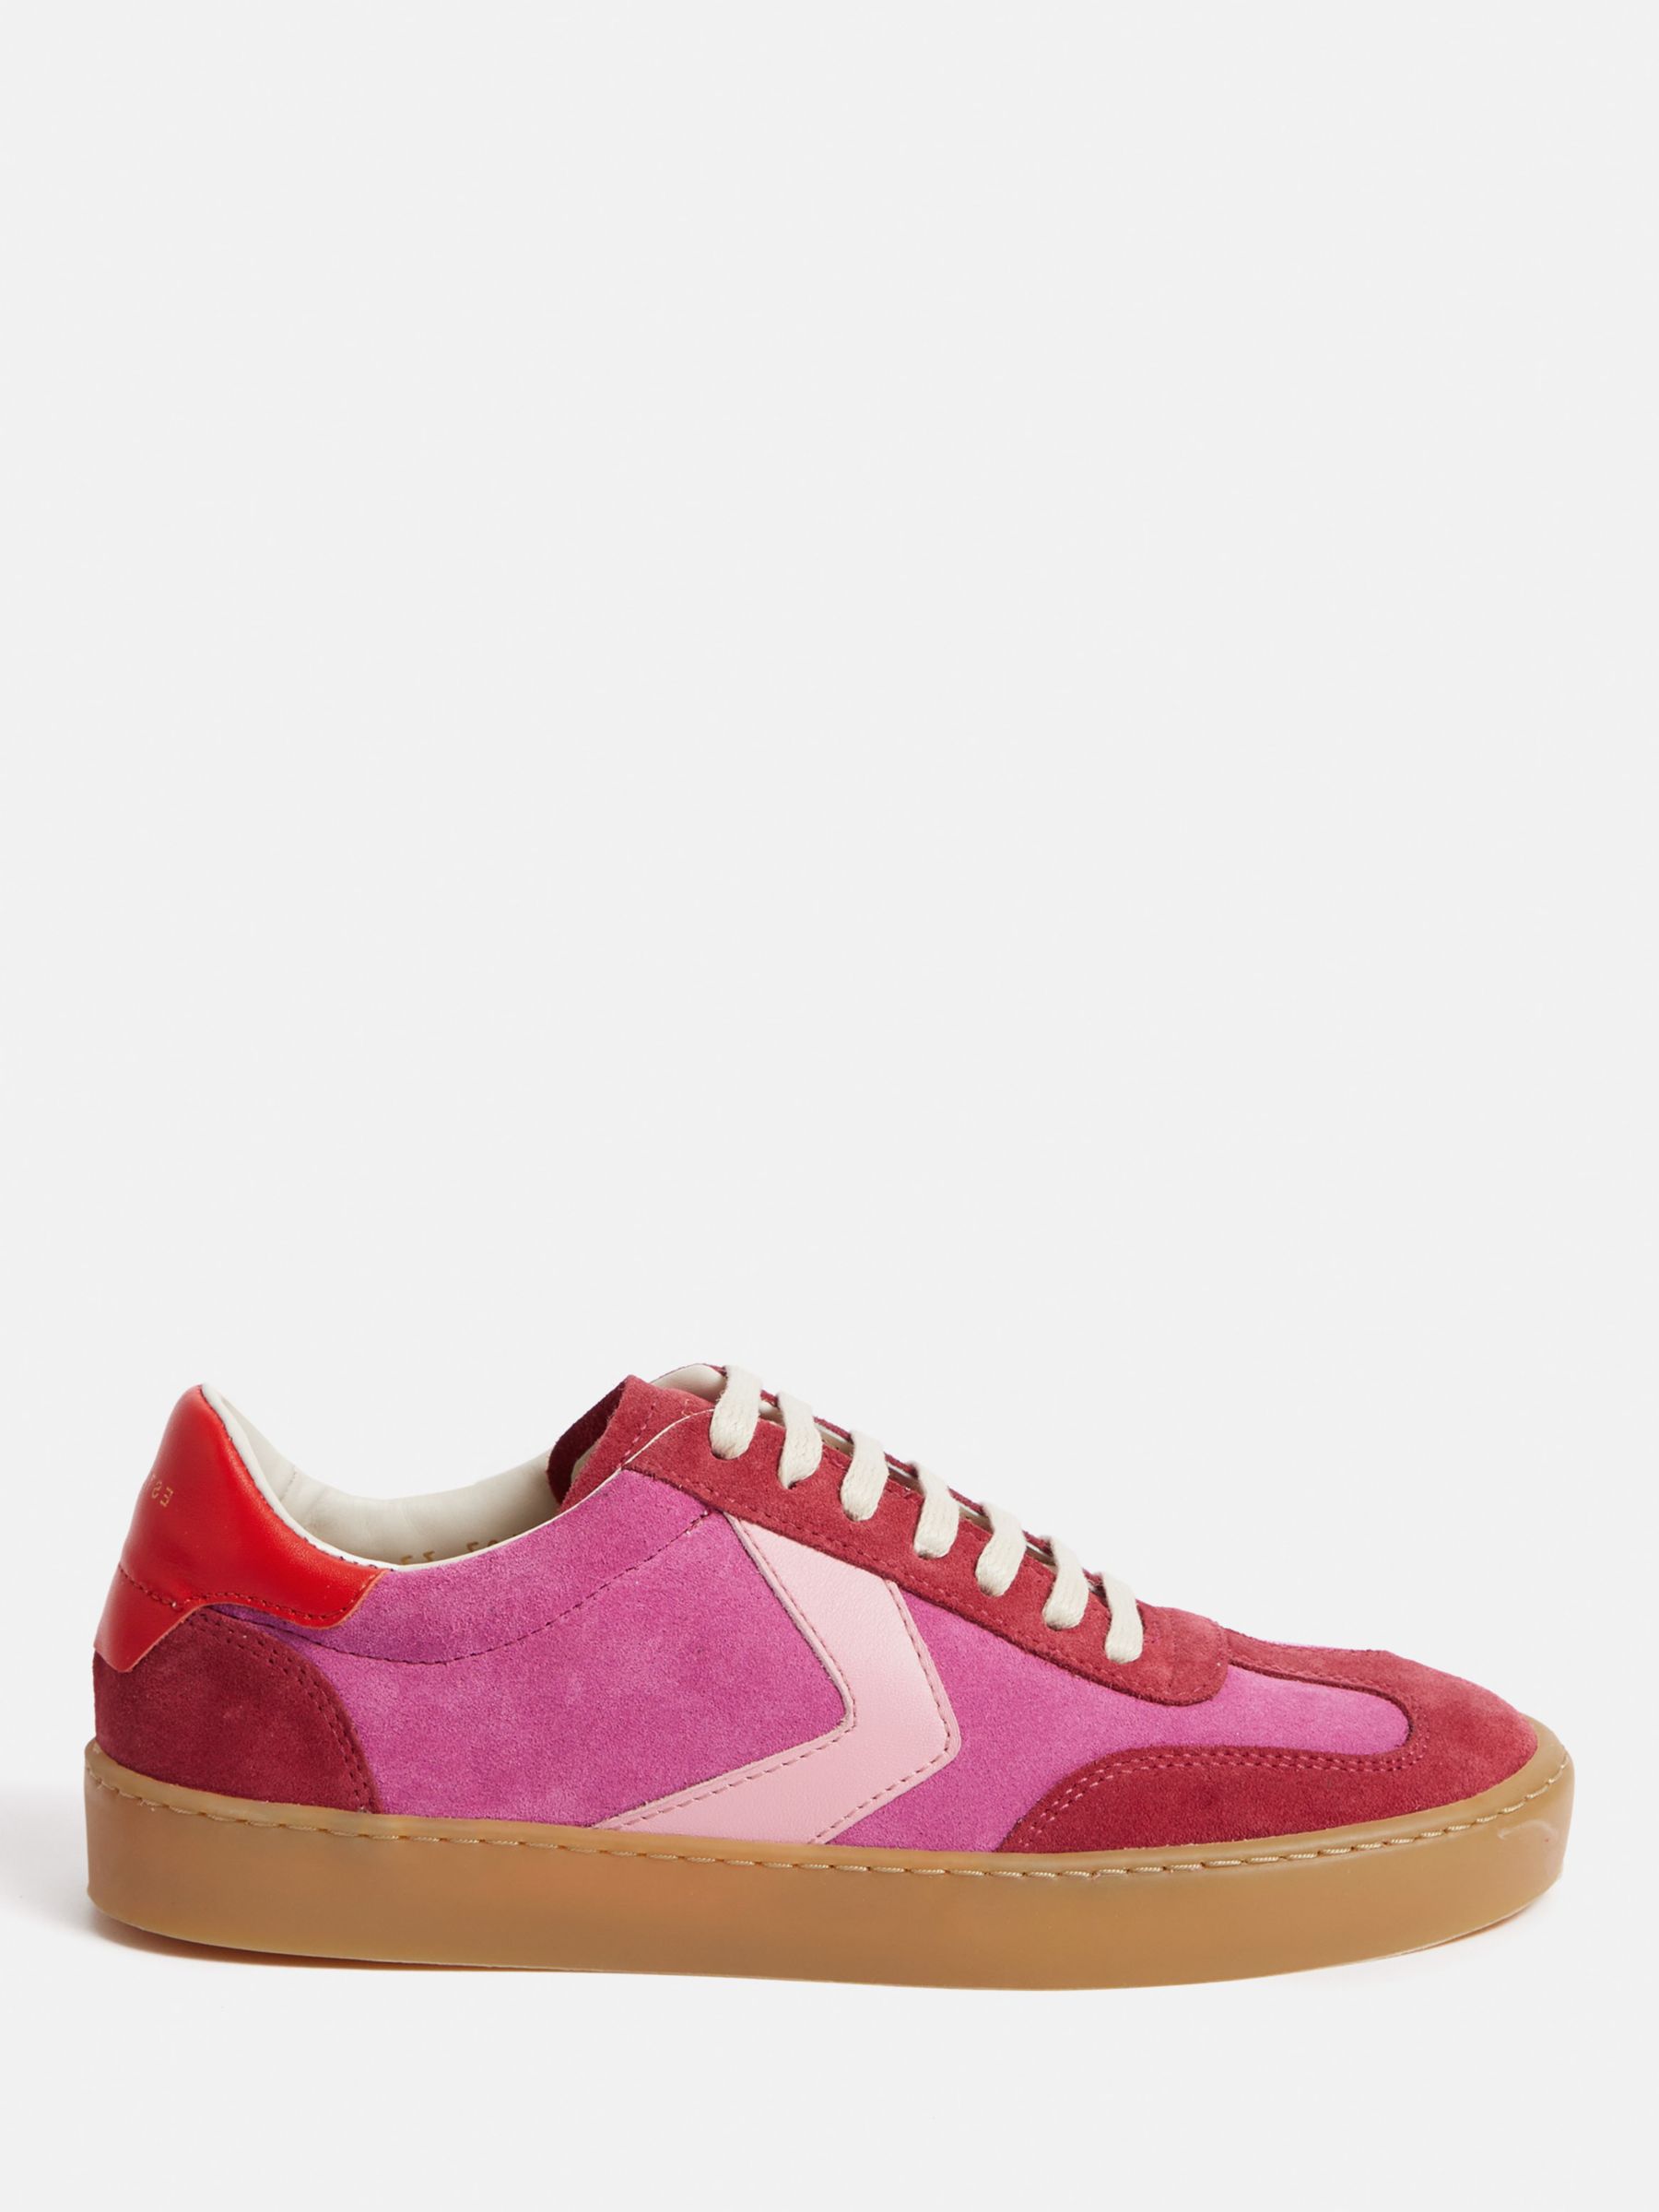 Jigsaw Portland Suede Low Top Trainers, Pink/Red at John Lewis & Partners